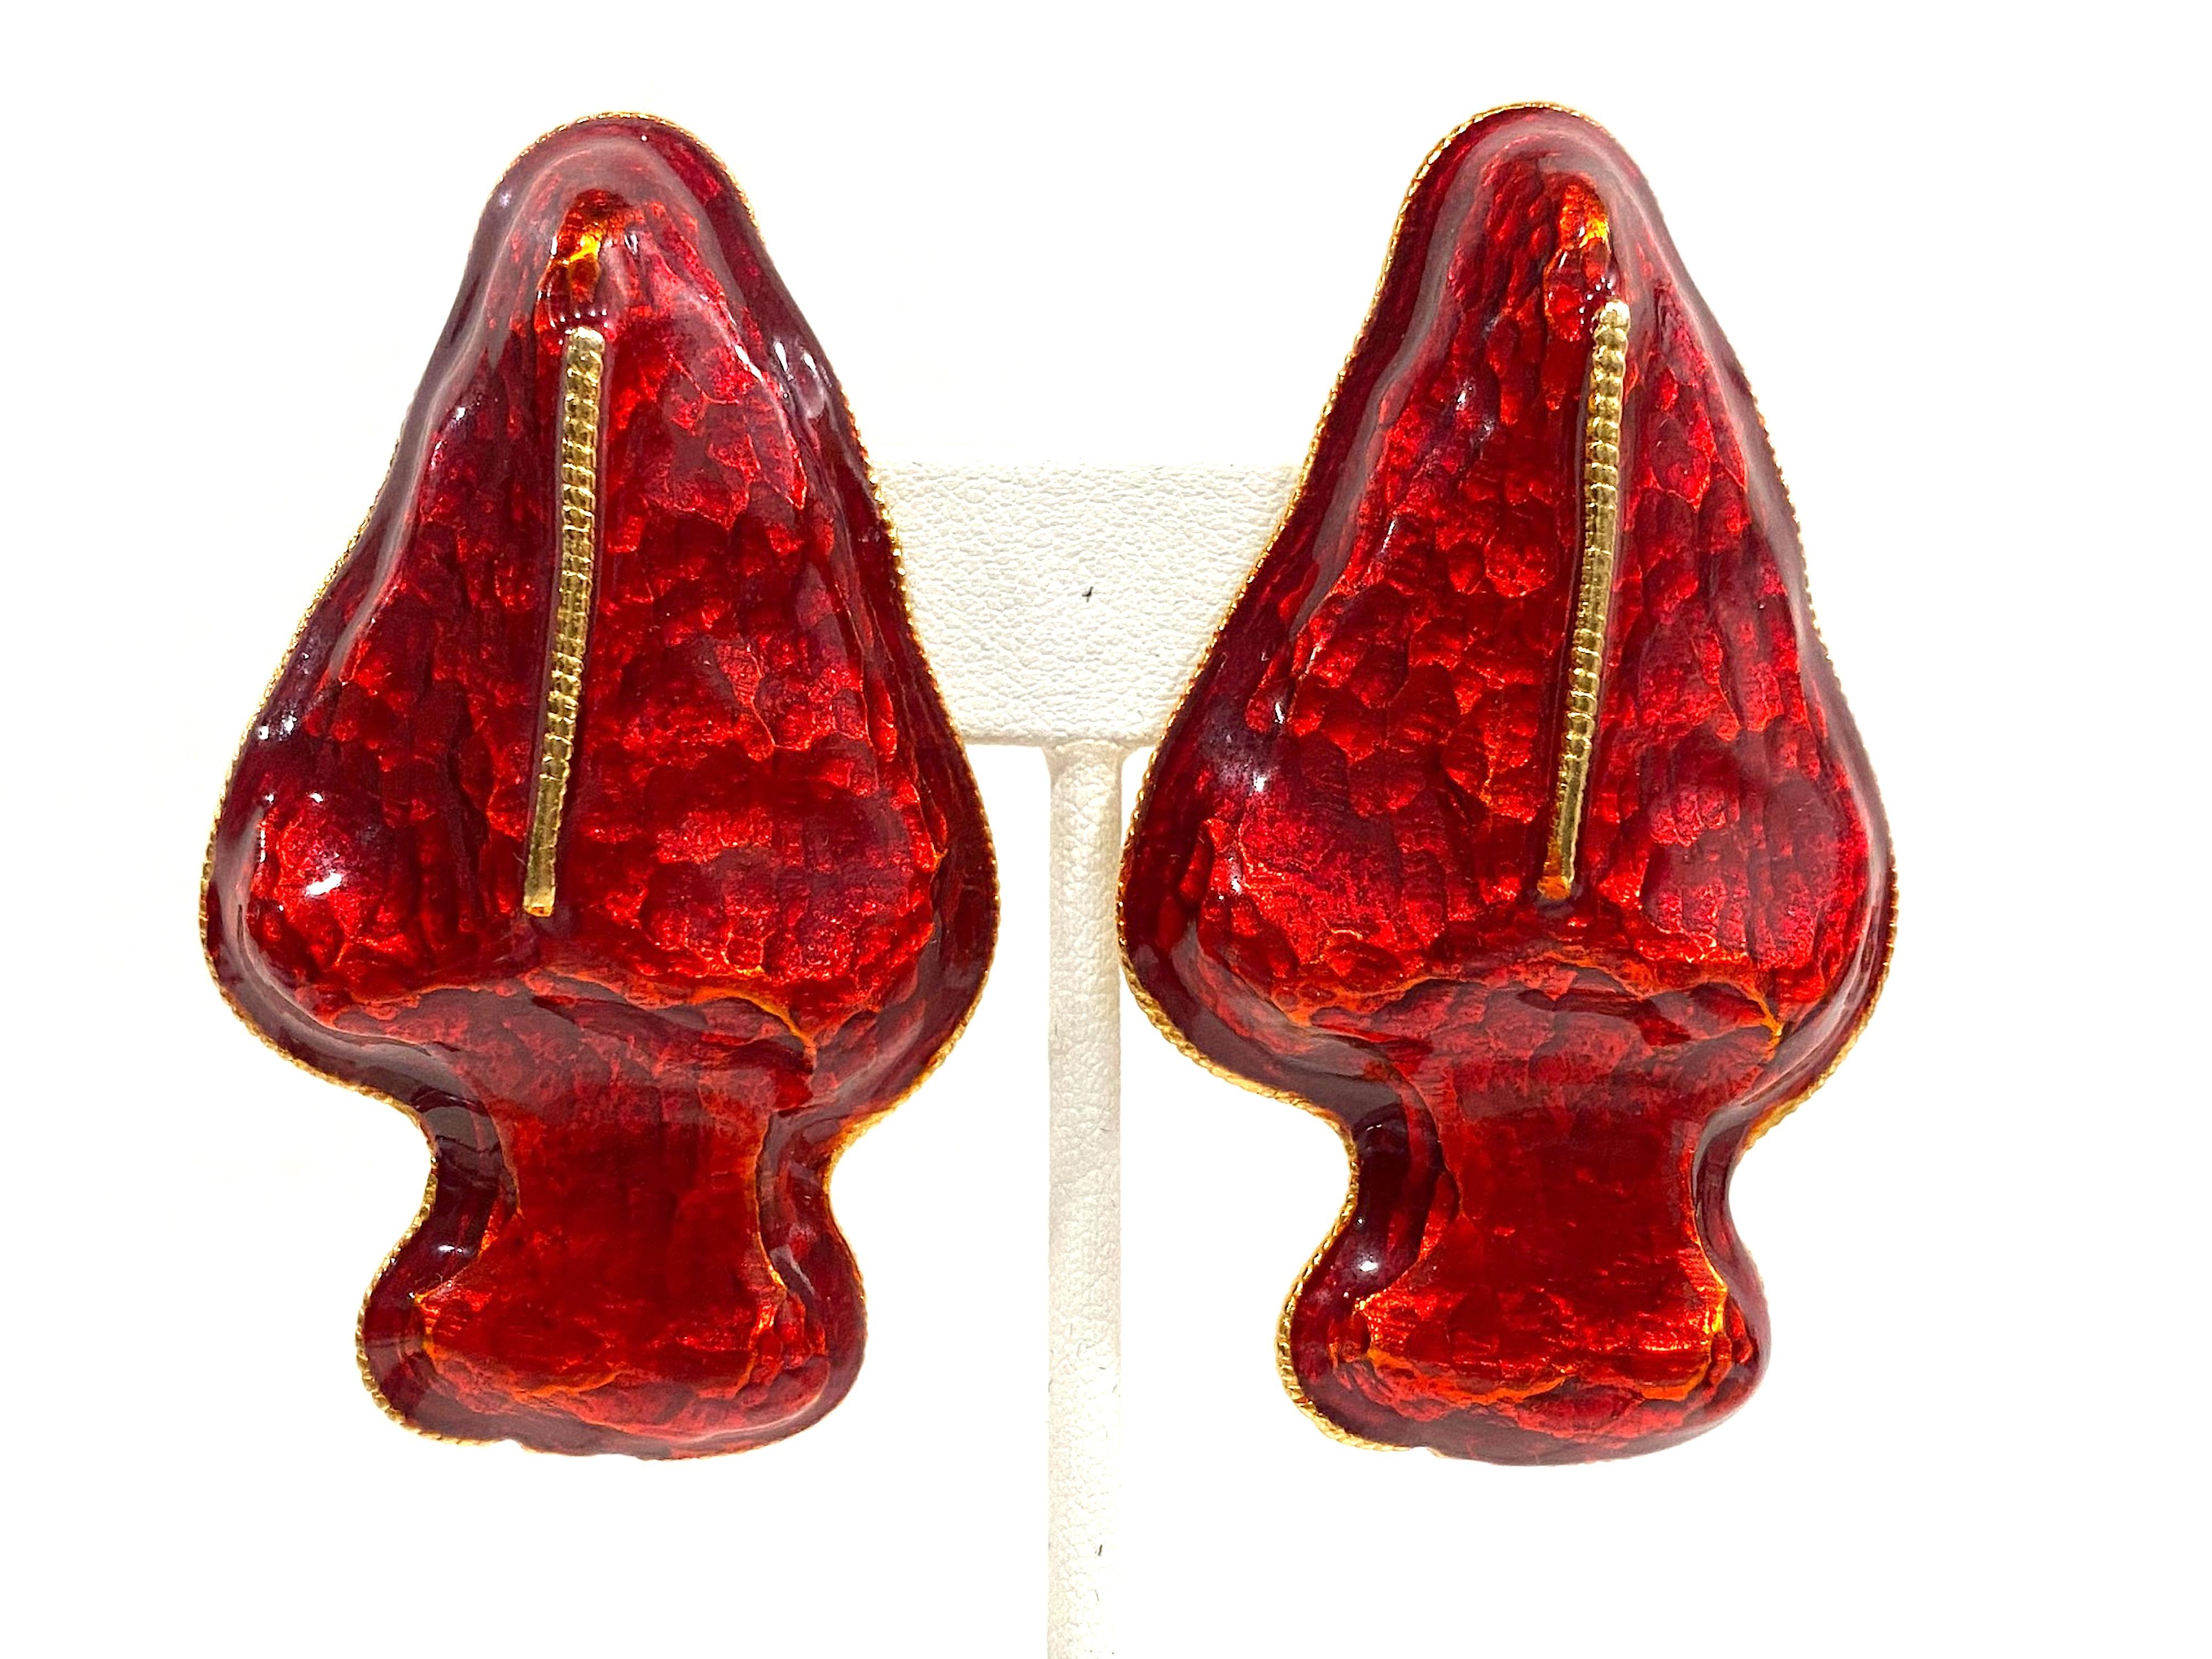 Presented is a unique, rare design large pair of 1980s Gerard Yosca red enamel earrings. Each earring measures 1.5 inches wide and 2.5 inches long. They are three dimensional and protrude outward or peak along the center .65 of an inch in dept. The